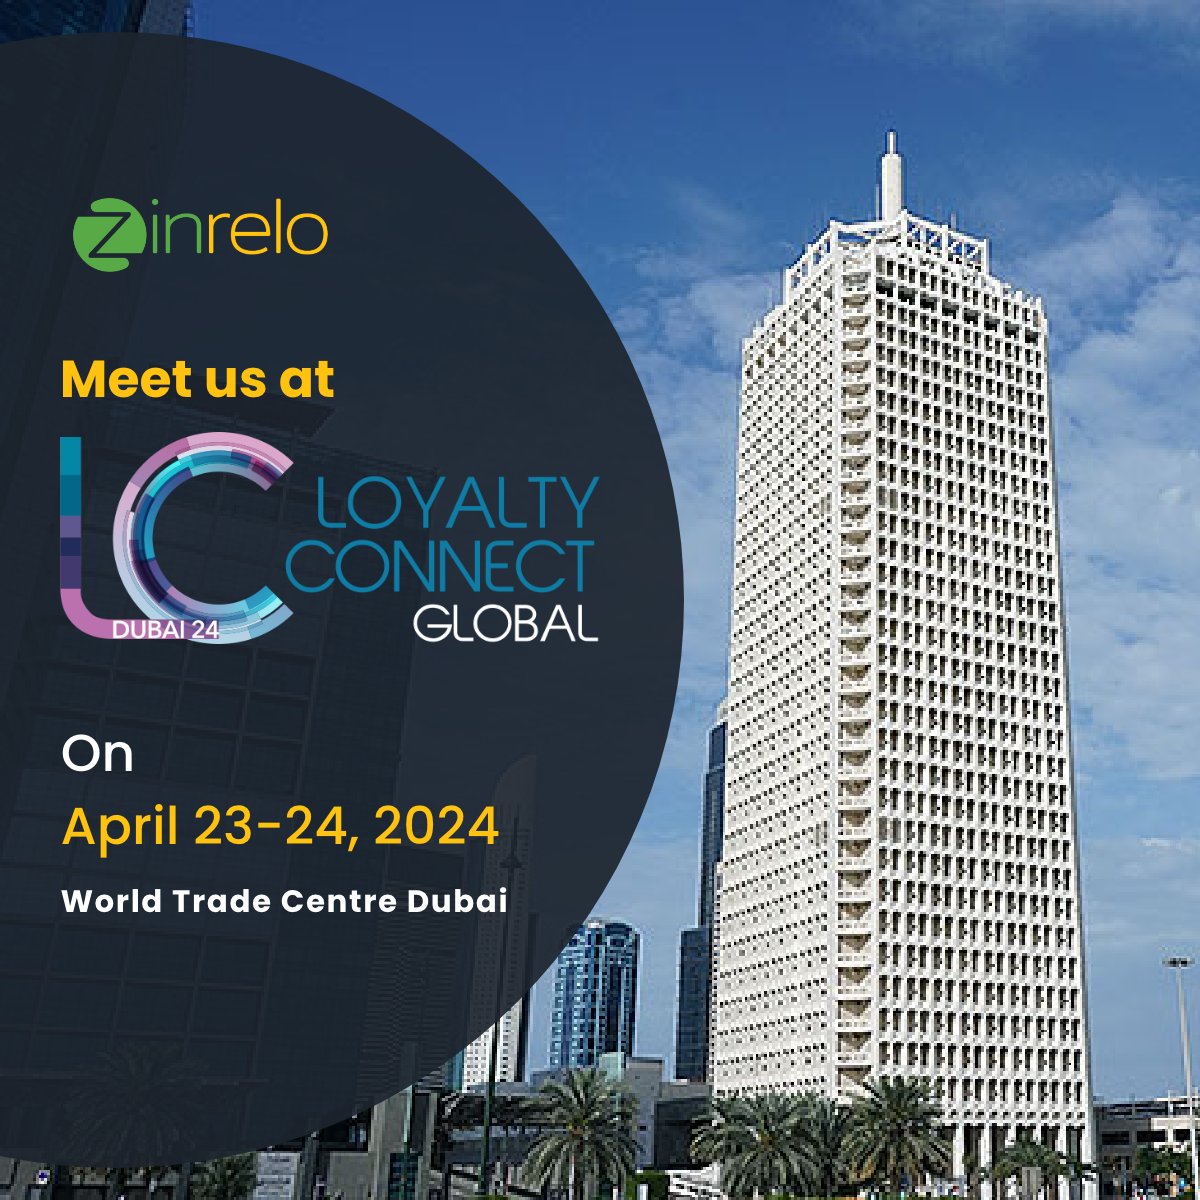 Join us at Loyalty Connect Global as we lead the charge in revolutionizing loyalty programs! With the Middle East's loyalty market rapidly evolving, Zinrelo is primed to meet the surge in demand.

Book a meeting with us here - bit.ly/4d6Z32z

#LoyaltyConnect #Zinrelo